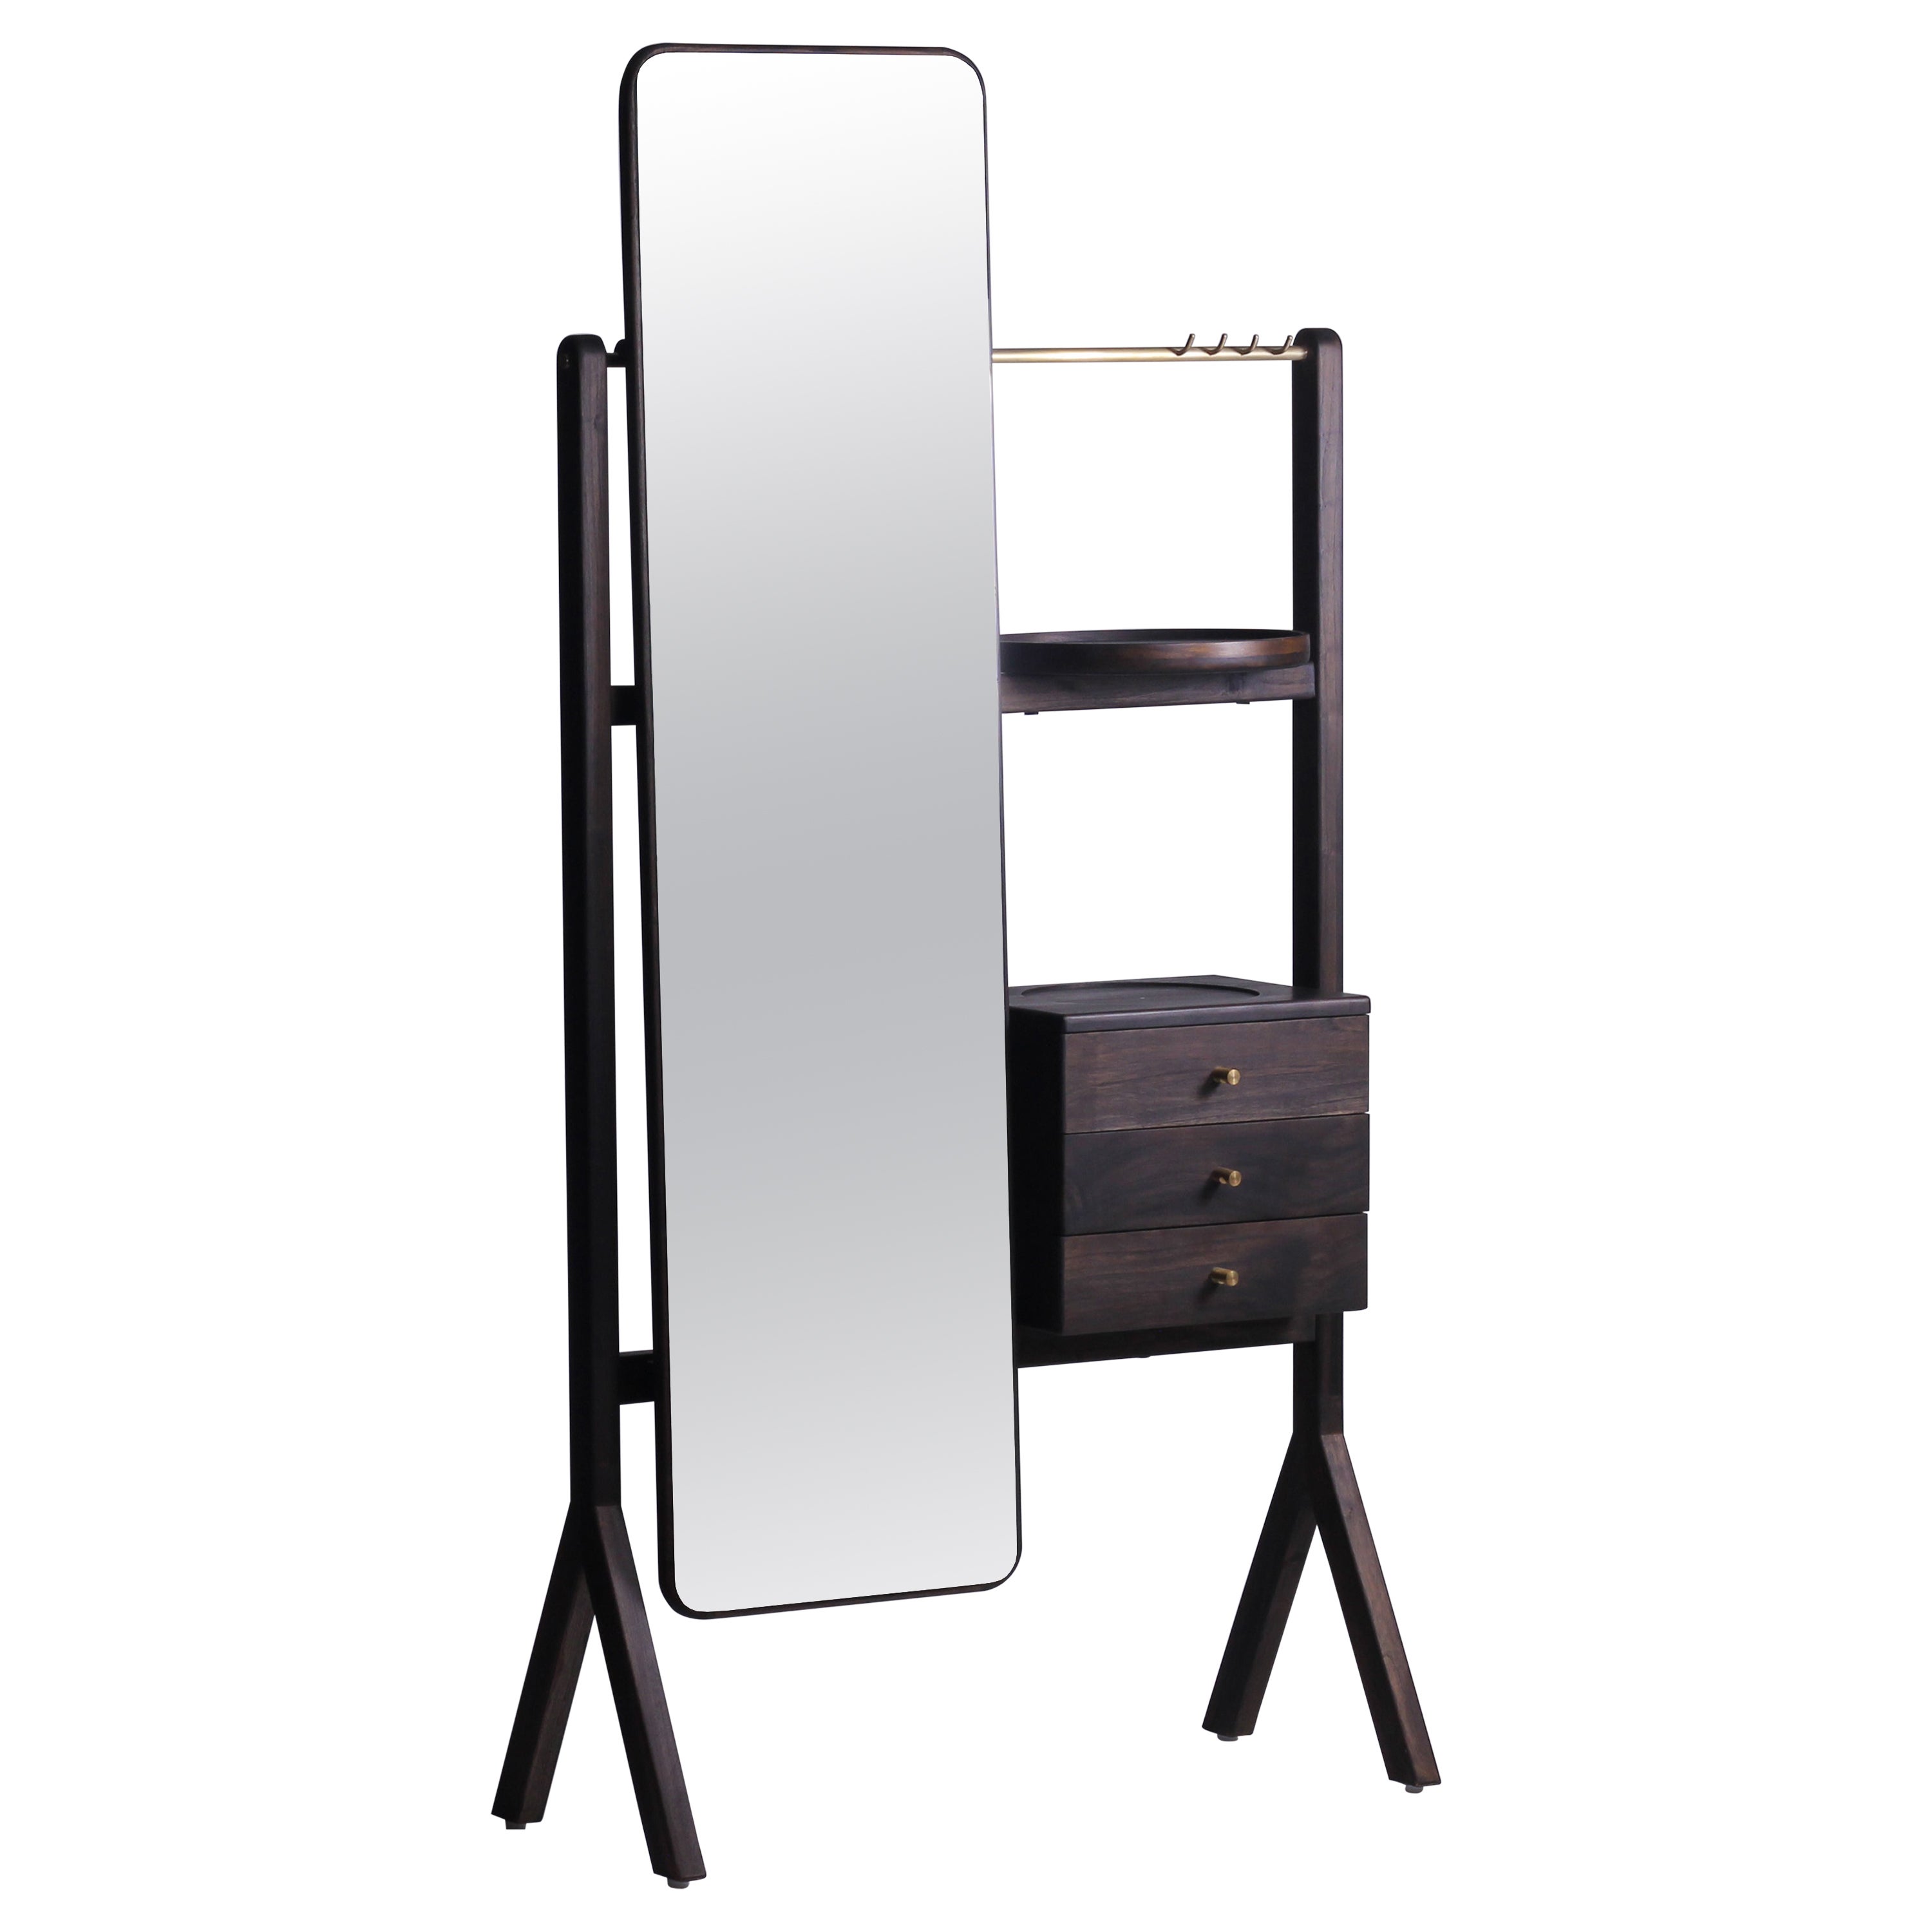 Cleopatra is a vanity dressing table in solid oak with a full length mirror, designed for bedrooms and walk-in wardrobes. Achieving a perfect balance between aesthetics and function, the design of Cleopatra aims to promote an inspiring and elevated